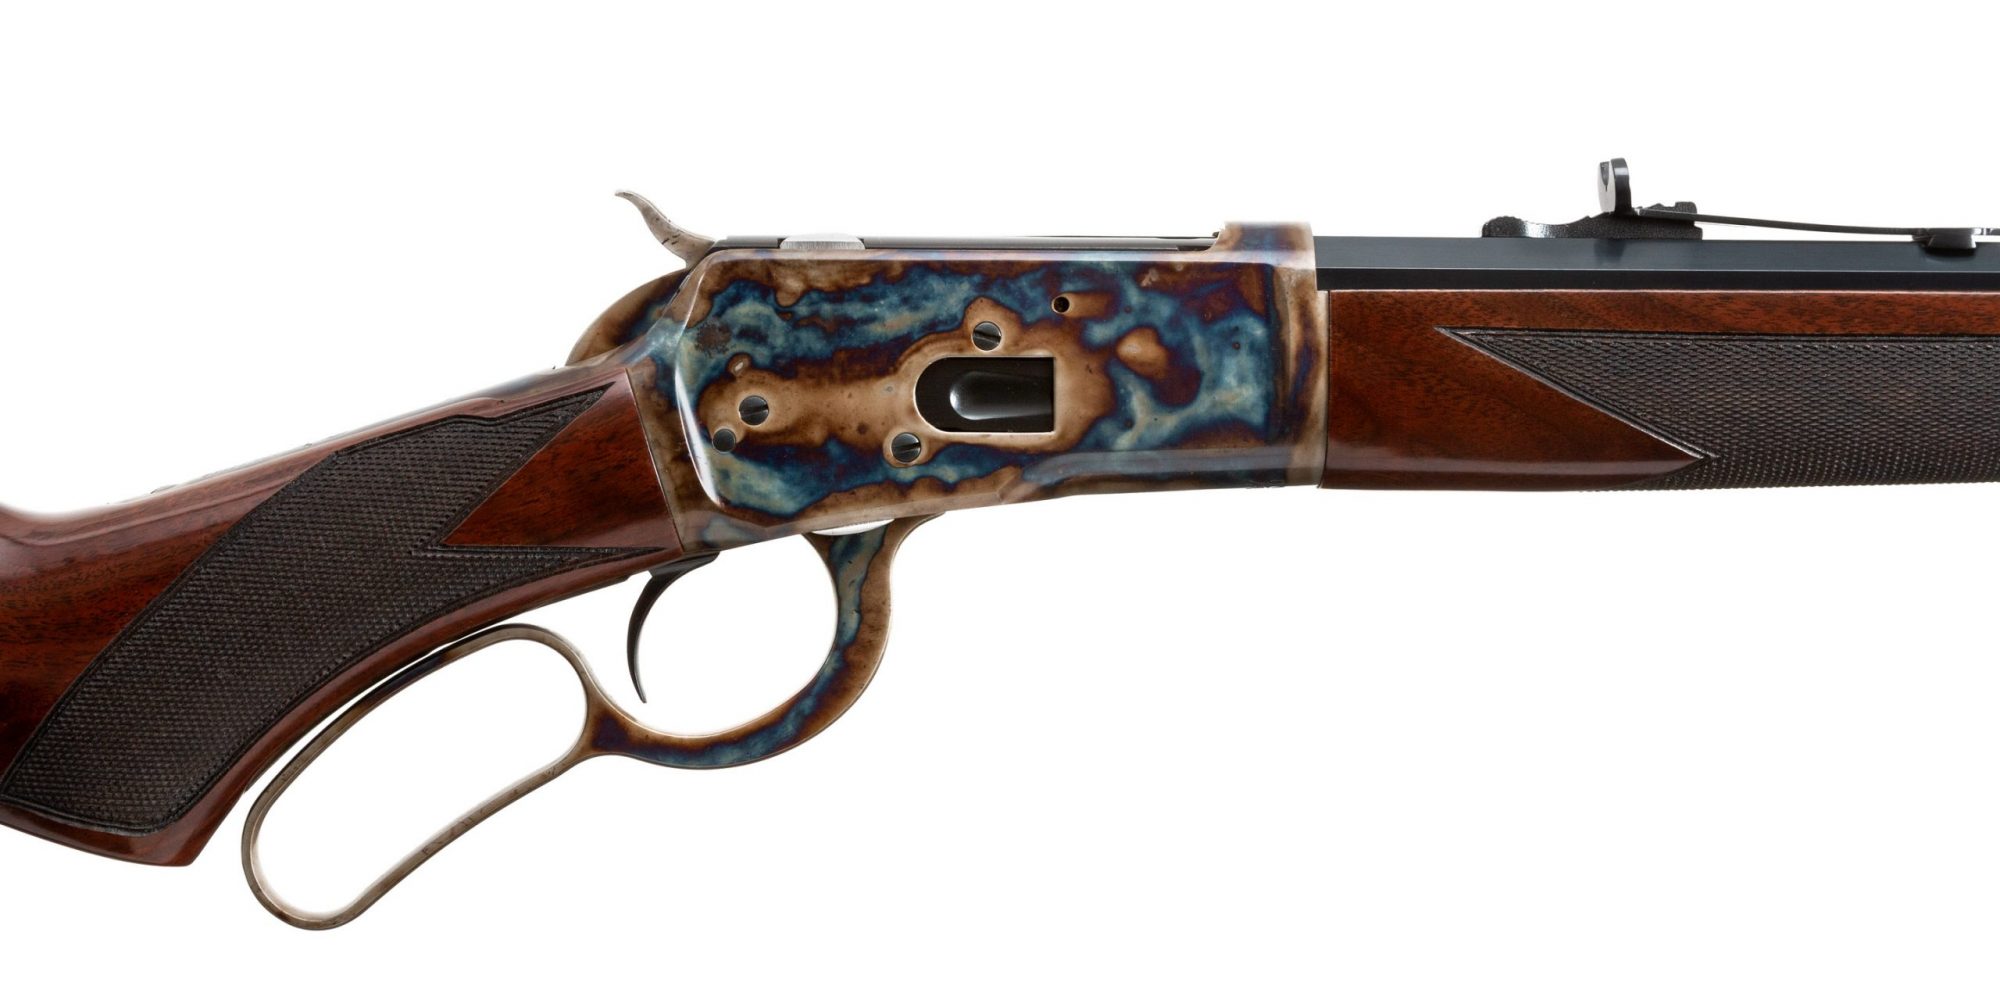 Photo of a color case hardened Winchester 1892 rifle, featuring bone charcoal color case hardening by Turnbull Restoration of Bloomfield, NY